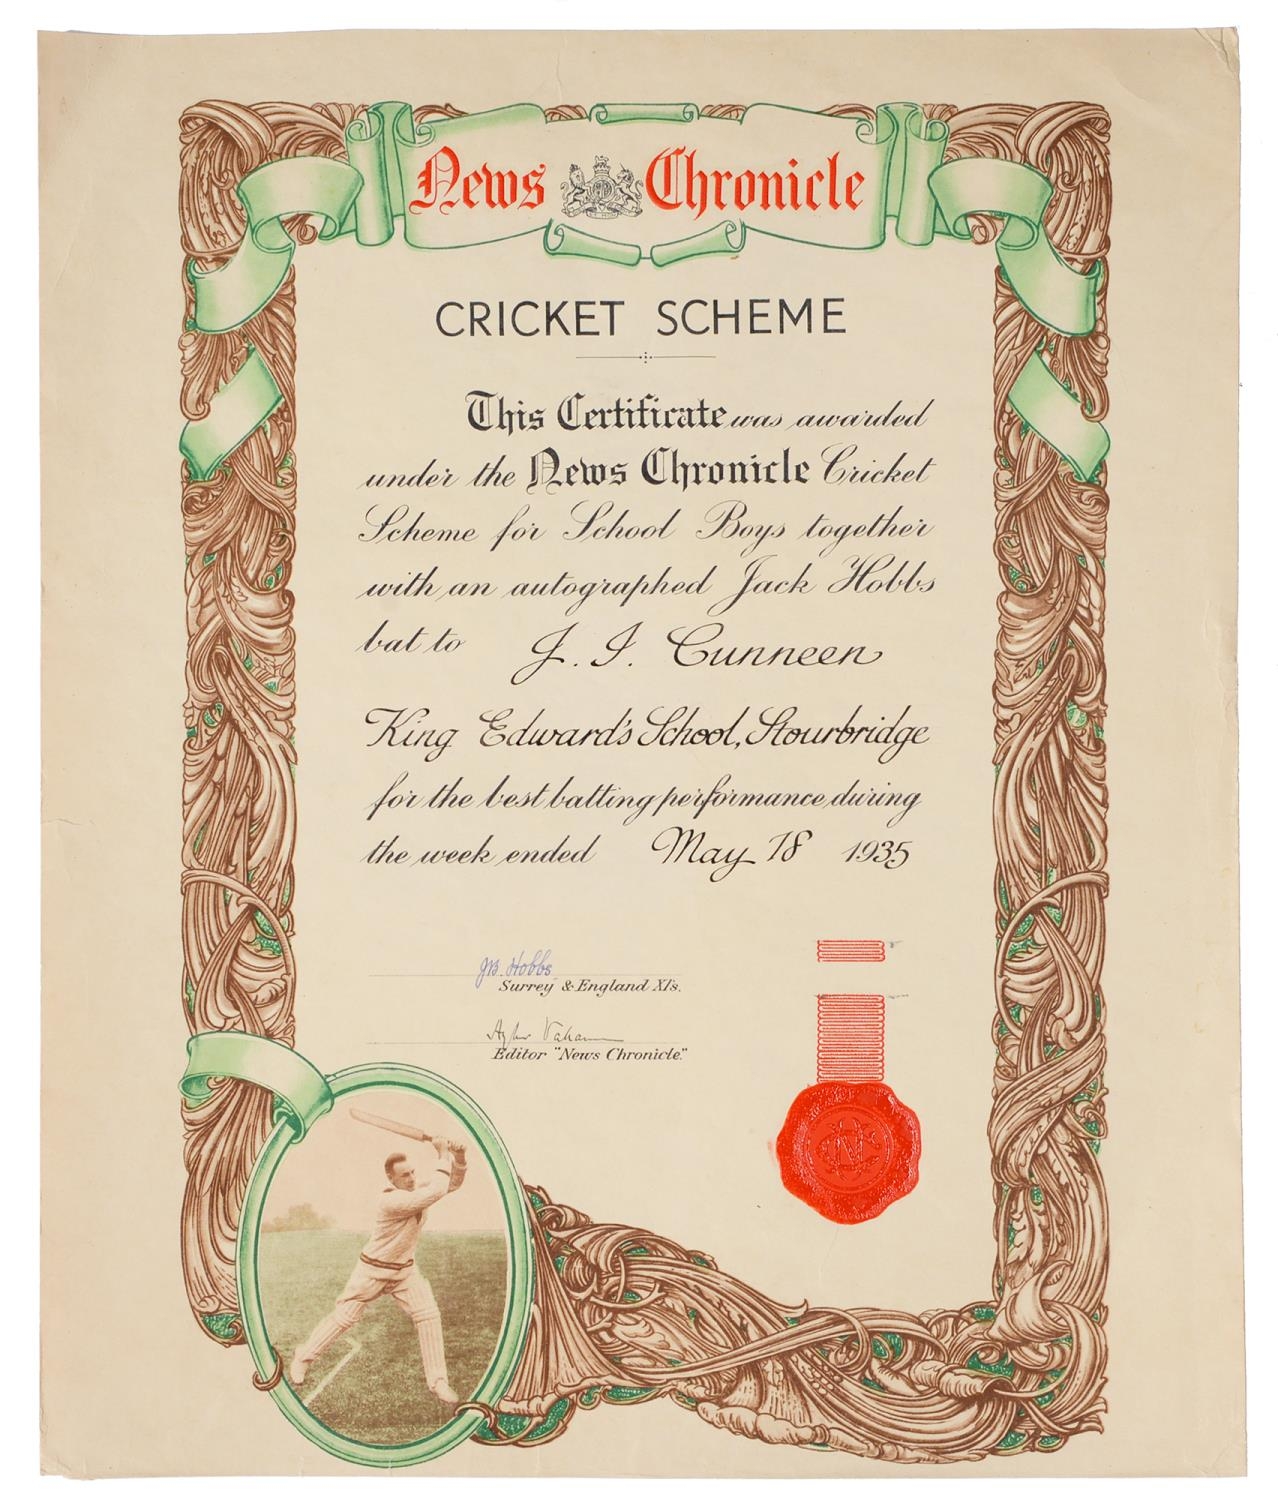 Jack Hobbs (1882-1963) - a rare News Chronicle Cricket Scheme Certificate awarded to J. I. Cunneen